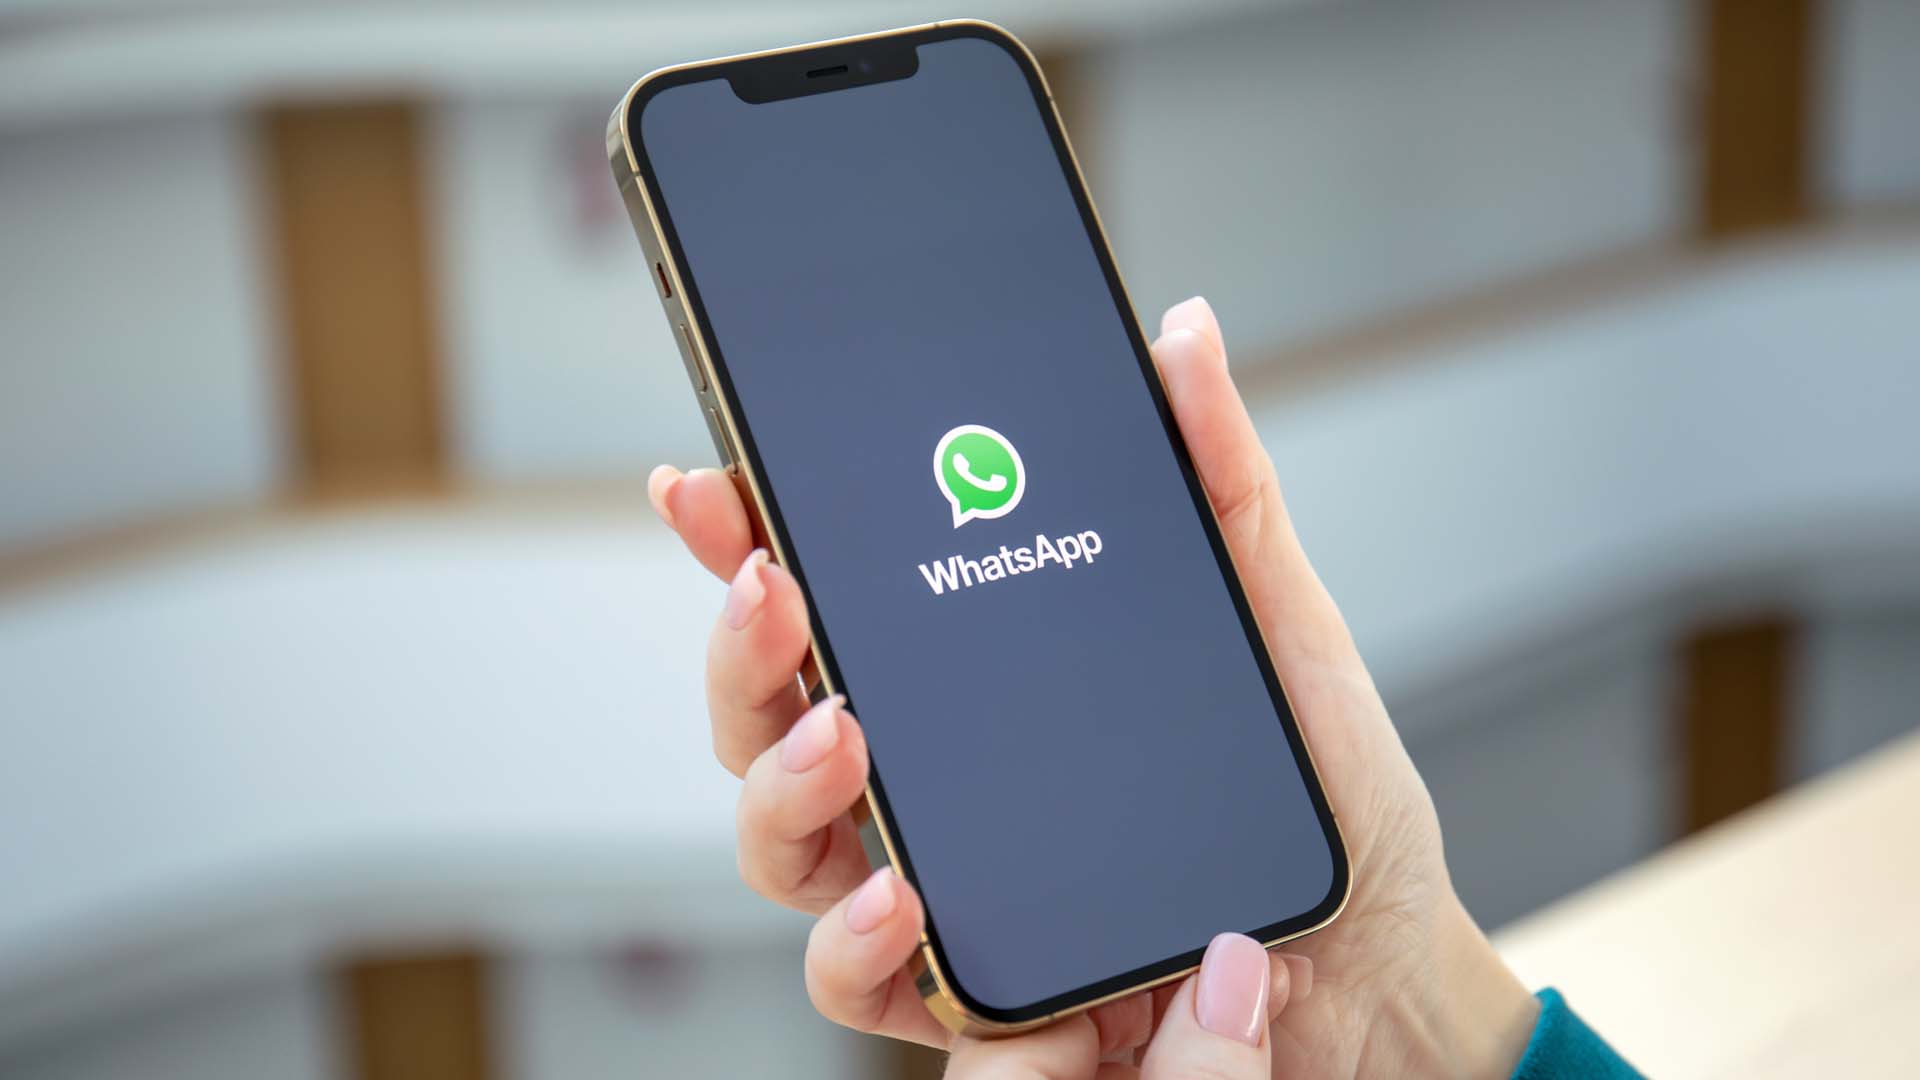 A phone with the WhatsApp app displayed on the screen